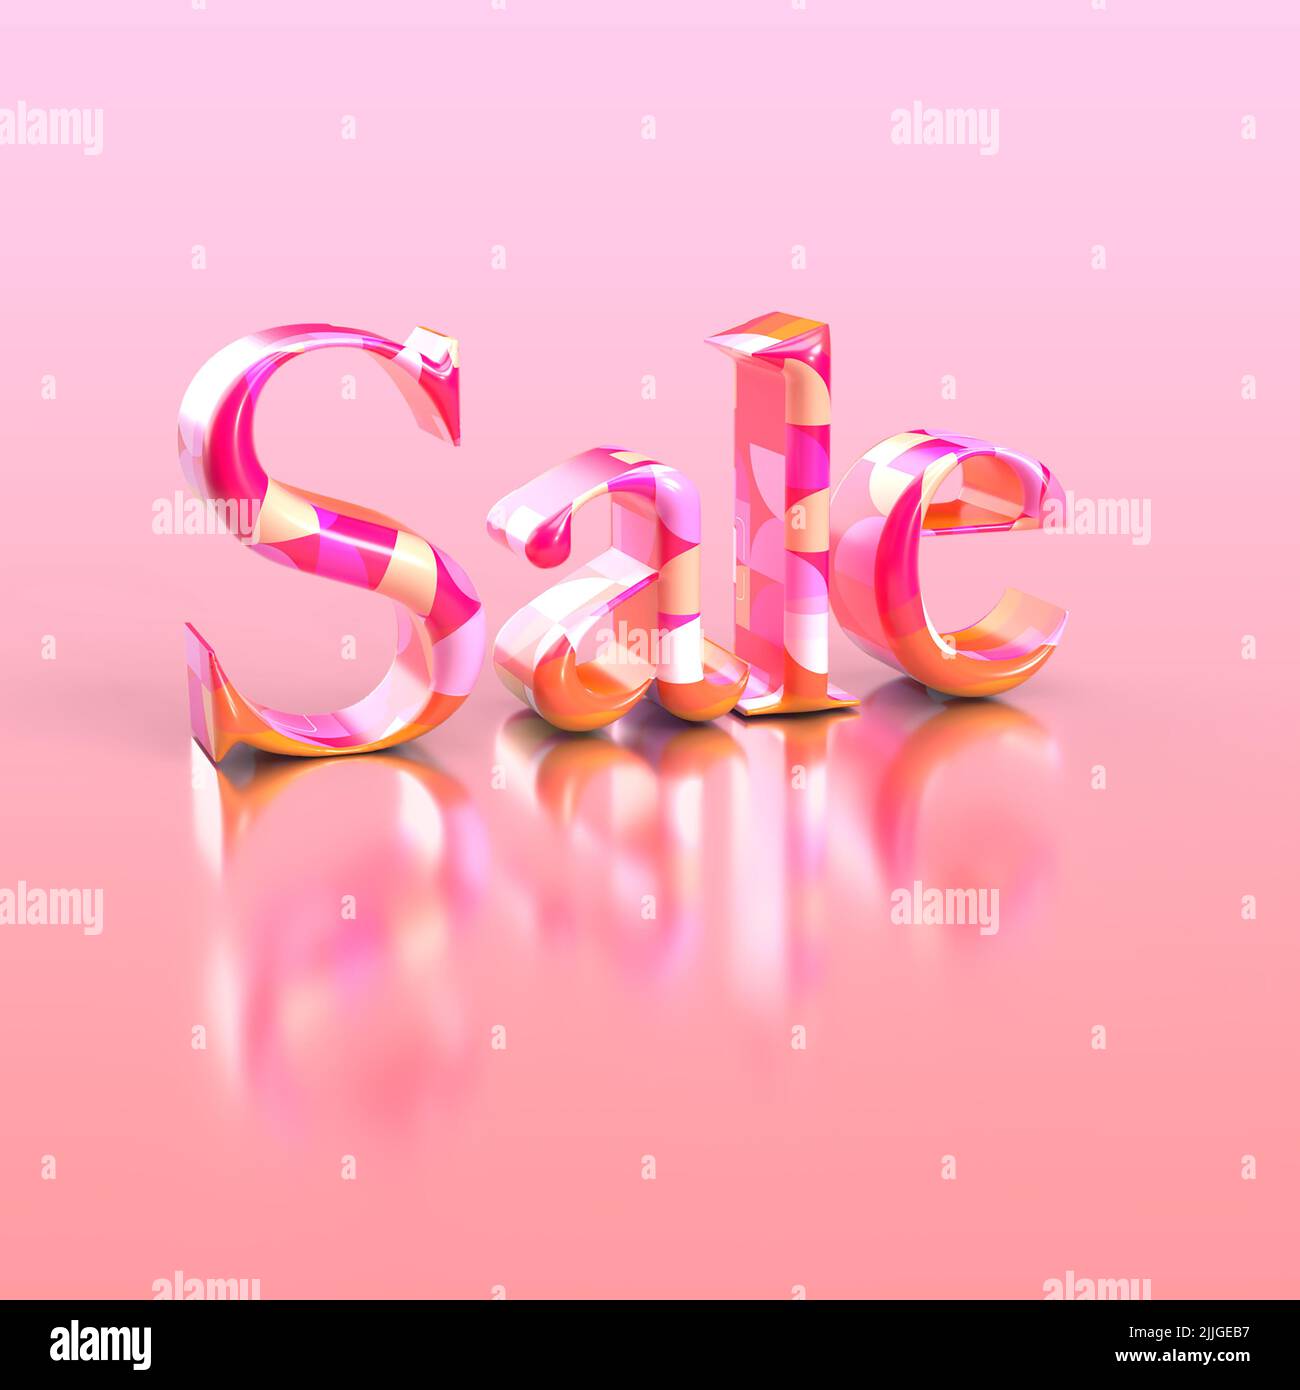 Colourful Sale 3D Render on a Pink Background with copy space. Stock Photo